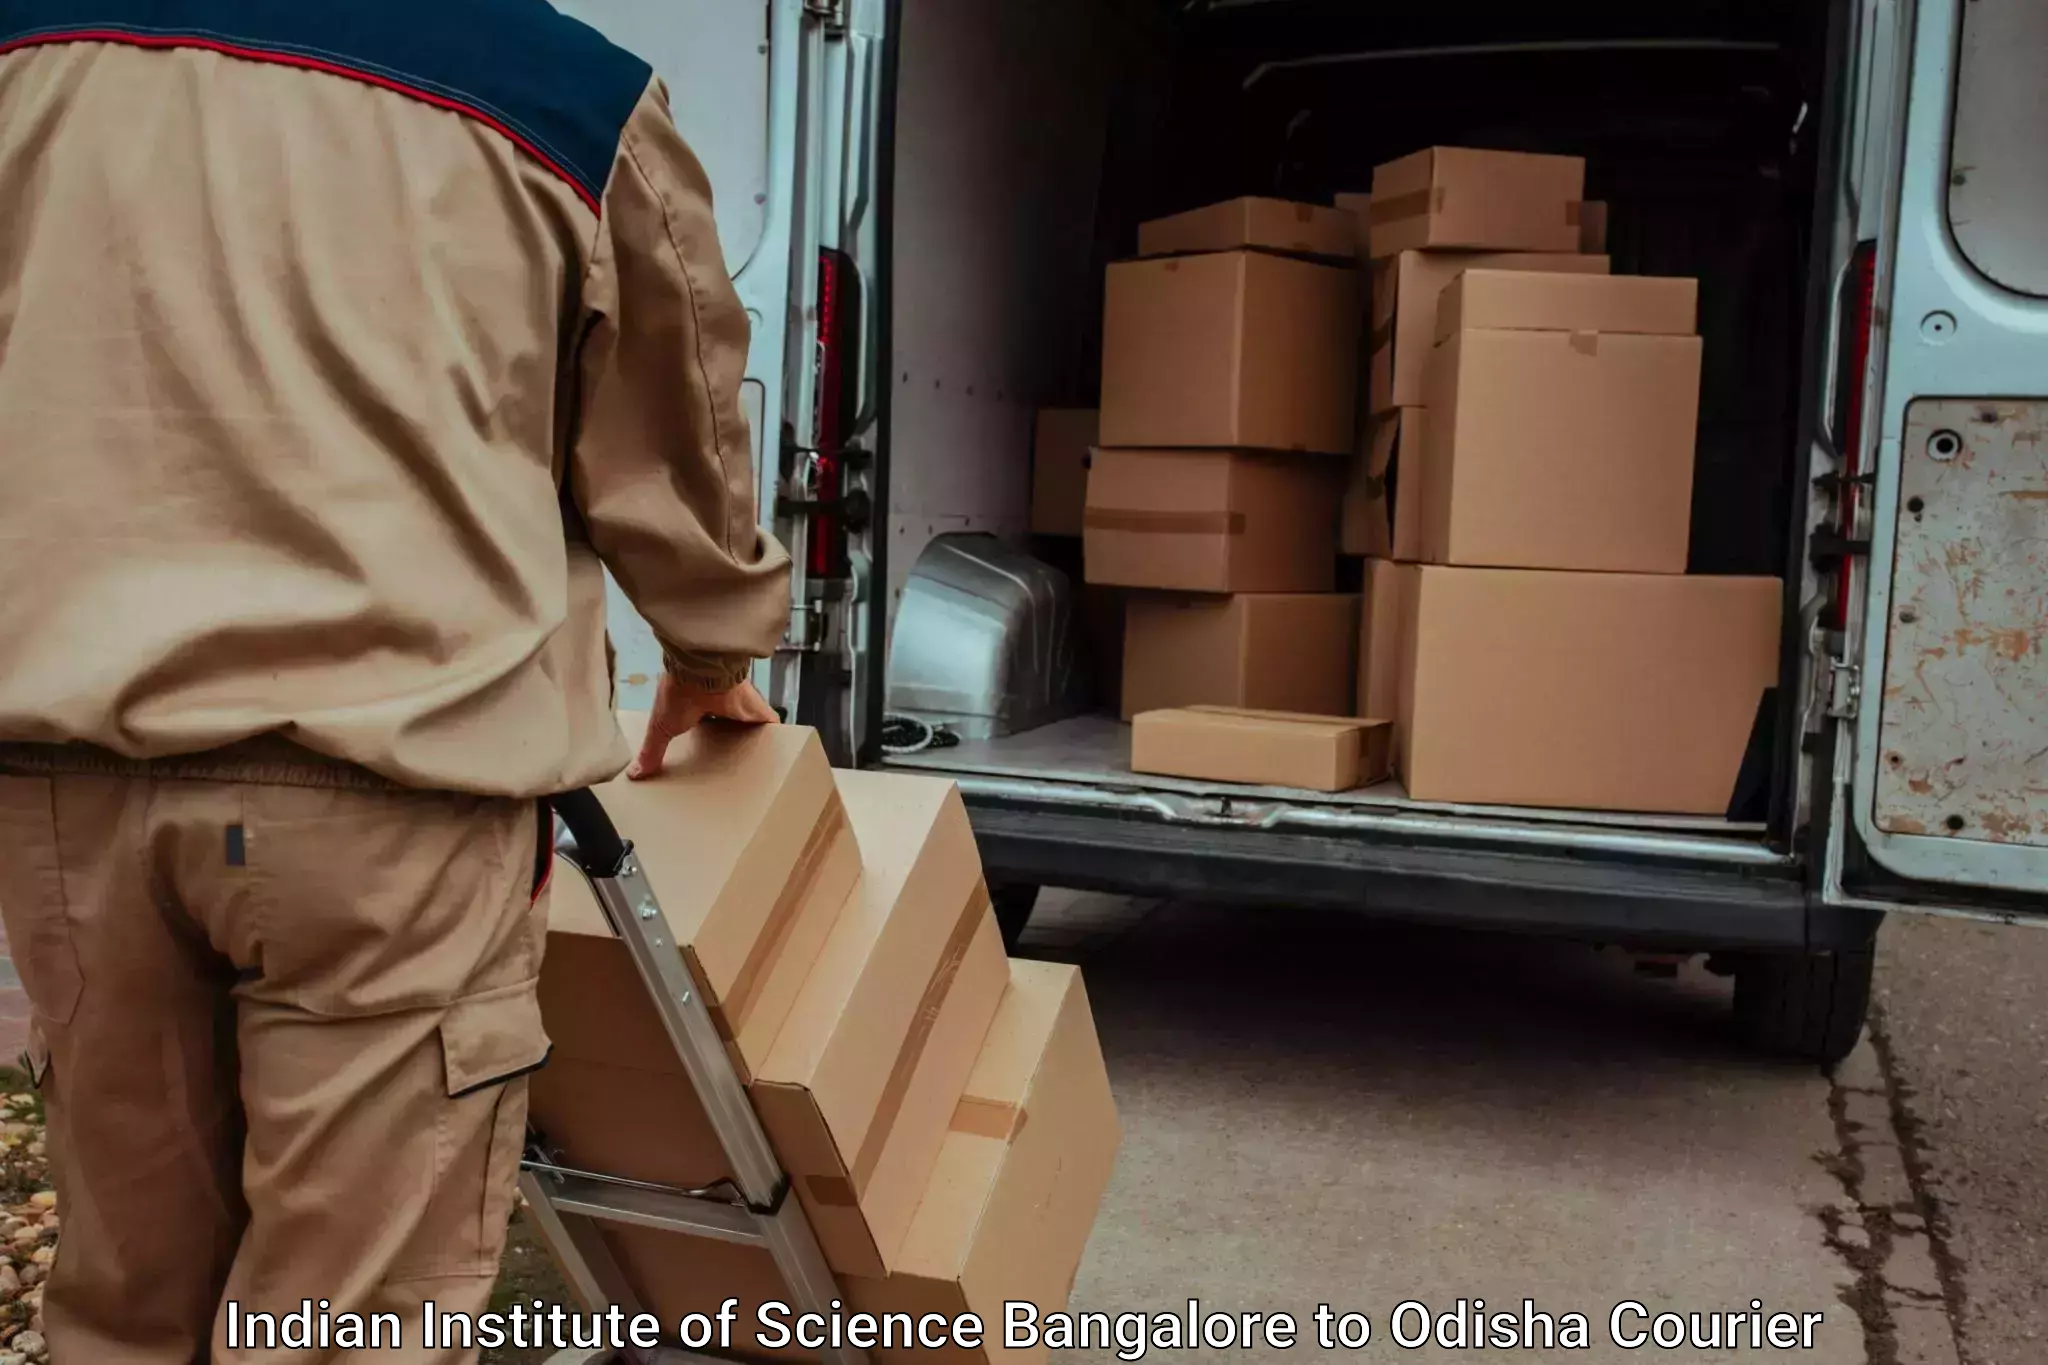 Quality moving company Indian Institute of Science Bangalore to Telkoi